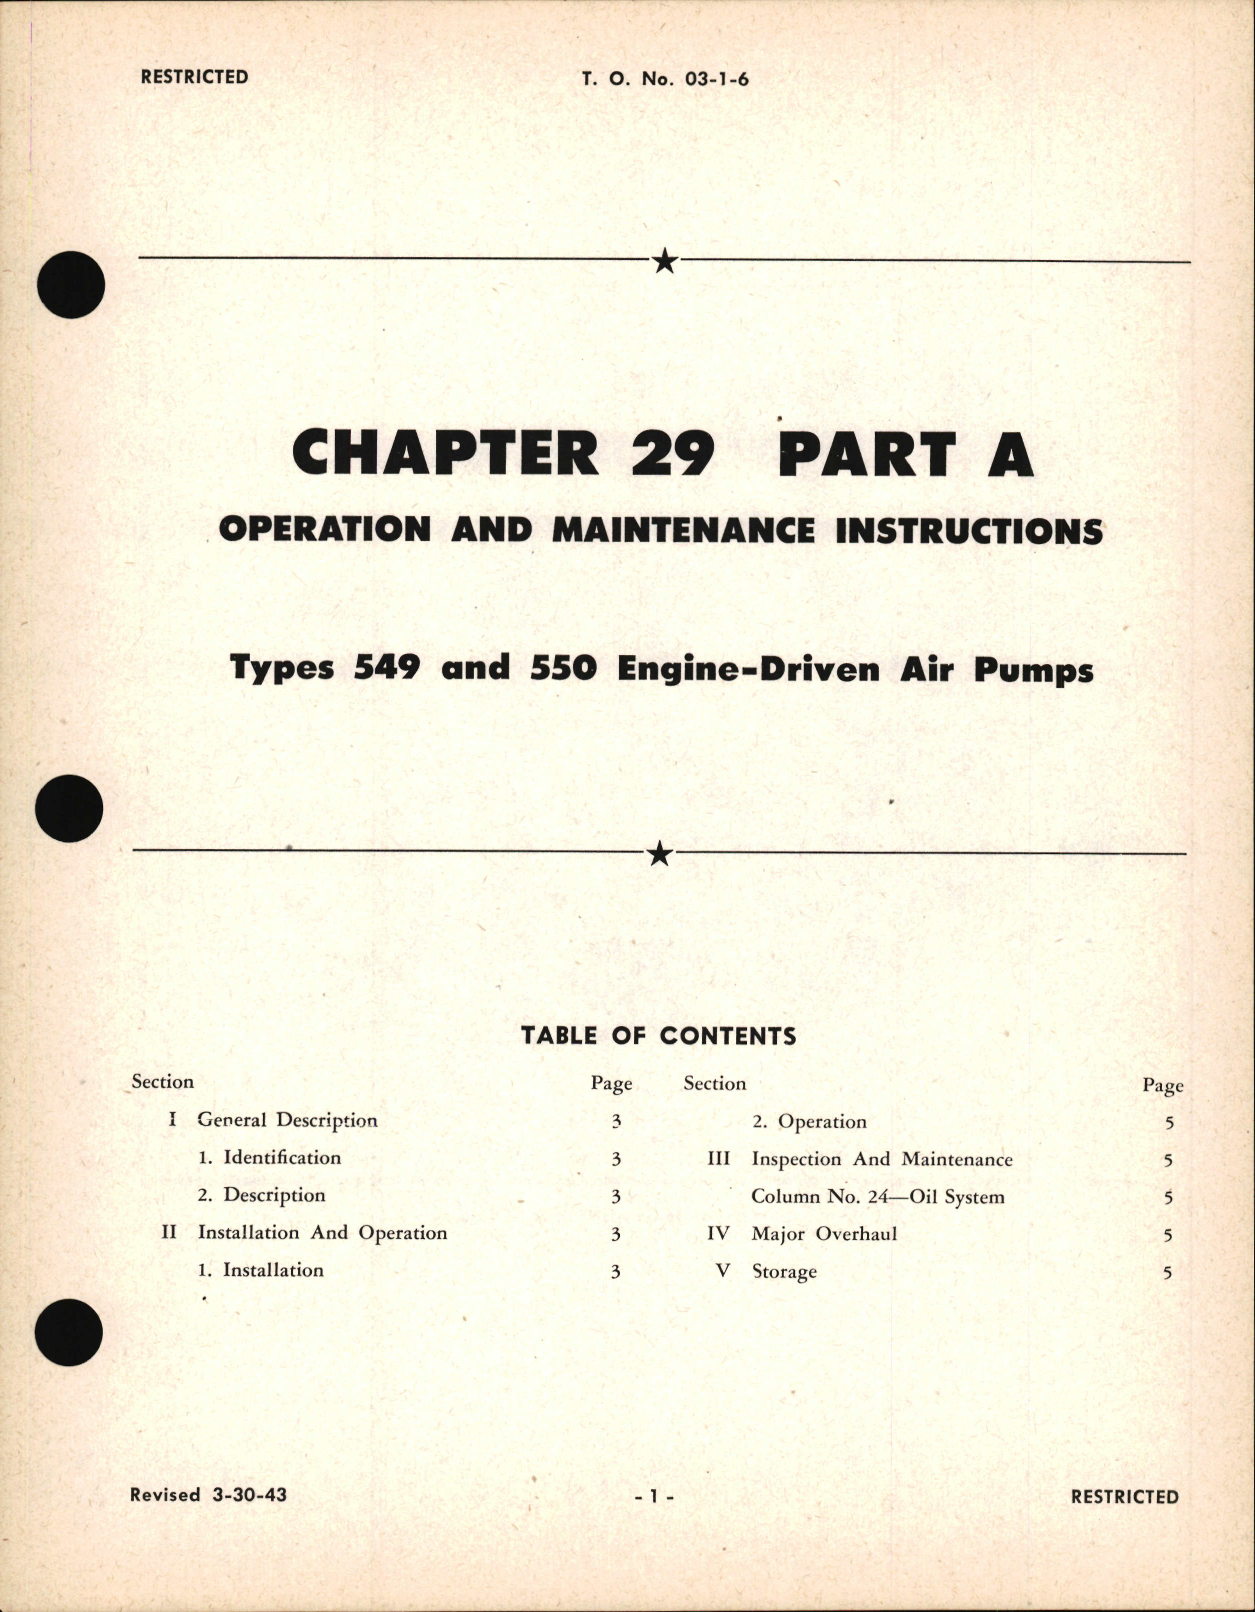 Sample page 1 from AirCorps Library document: Operation and Maintenance Instructions for Engine-Driven Air Pumps, Types 549 & 550